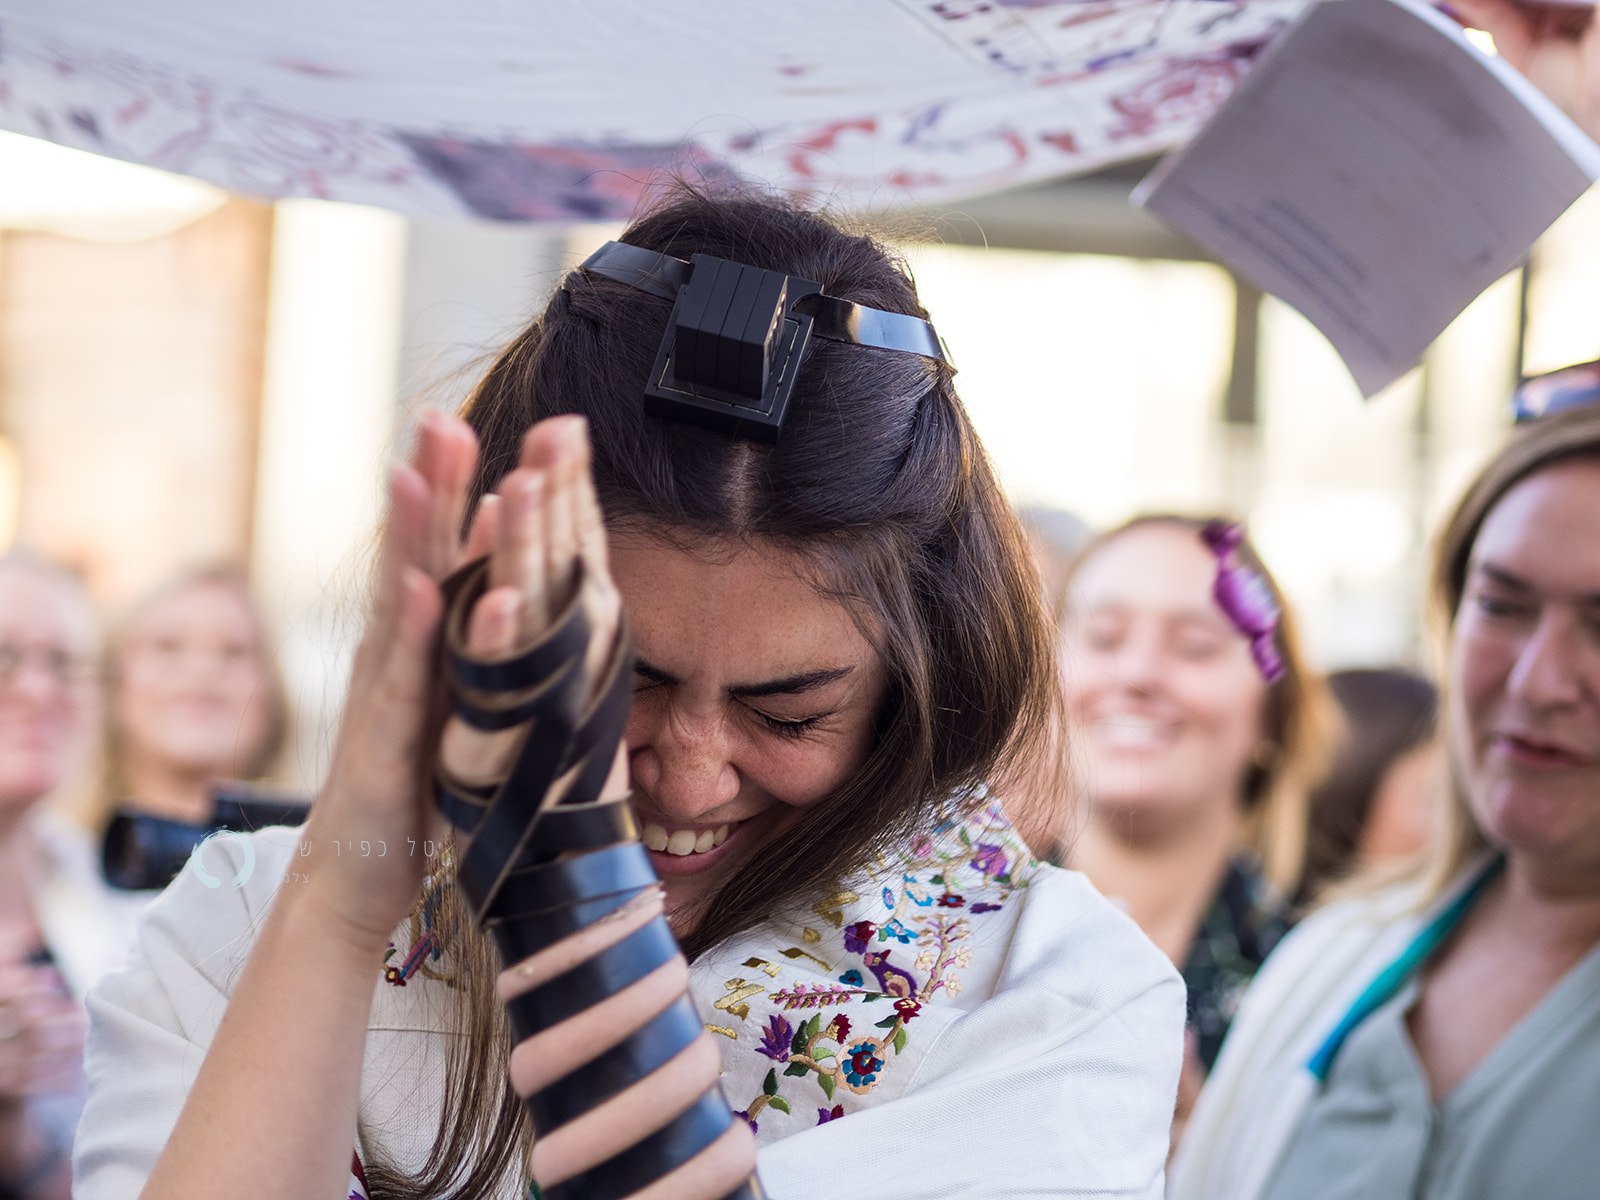 A woman with brown hair and tefillin praying